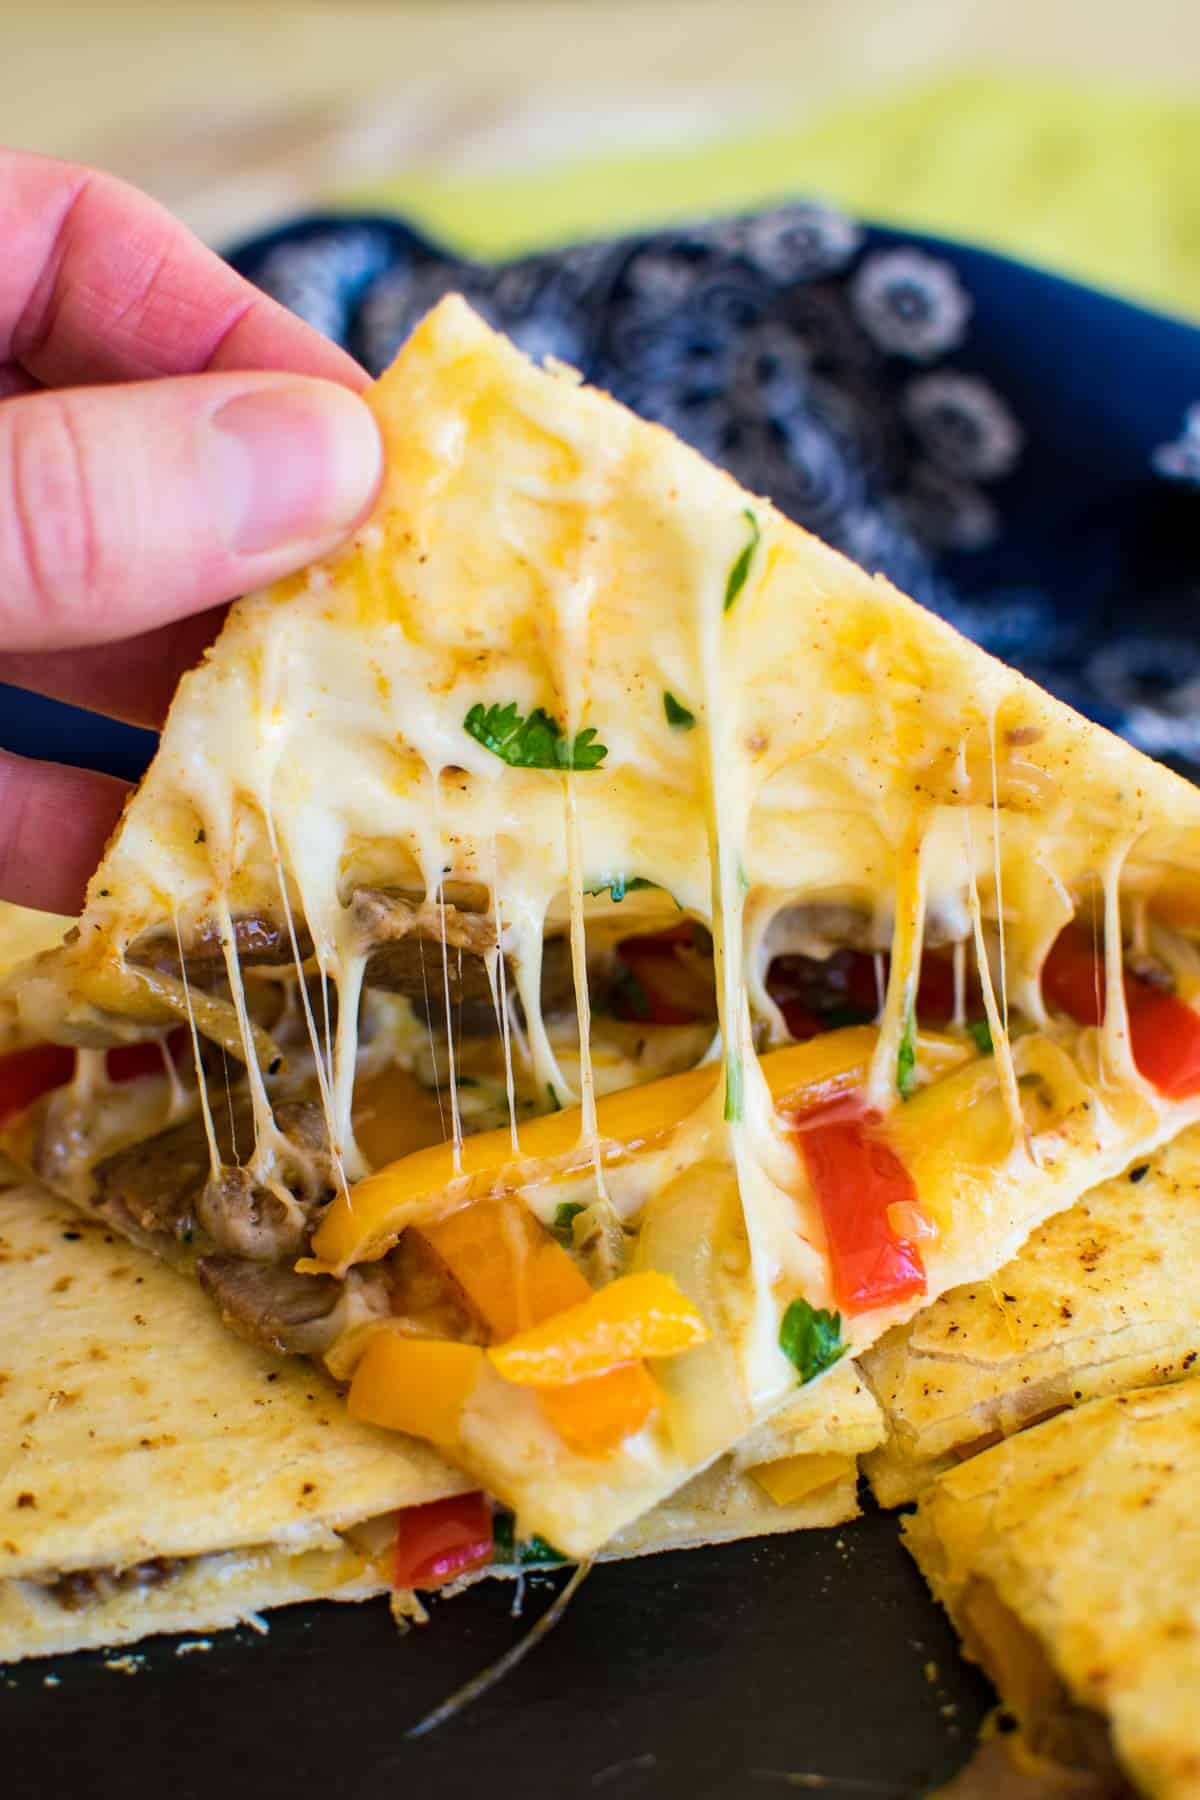 A steak and cheese quesadilla that's being opened to show gooey cheese.